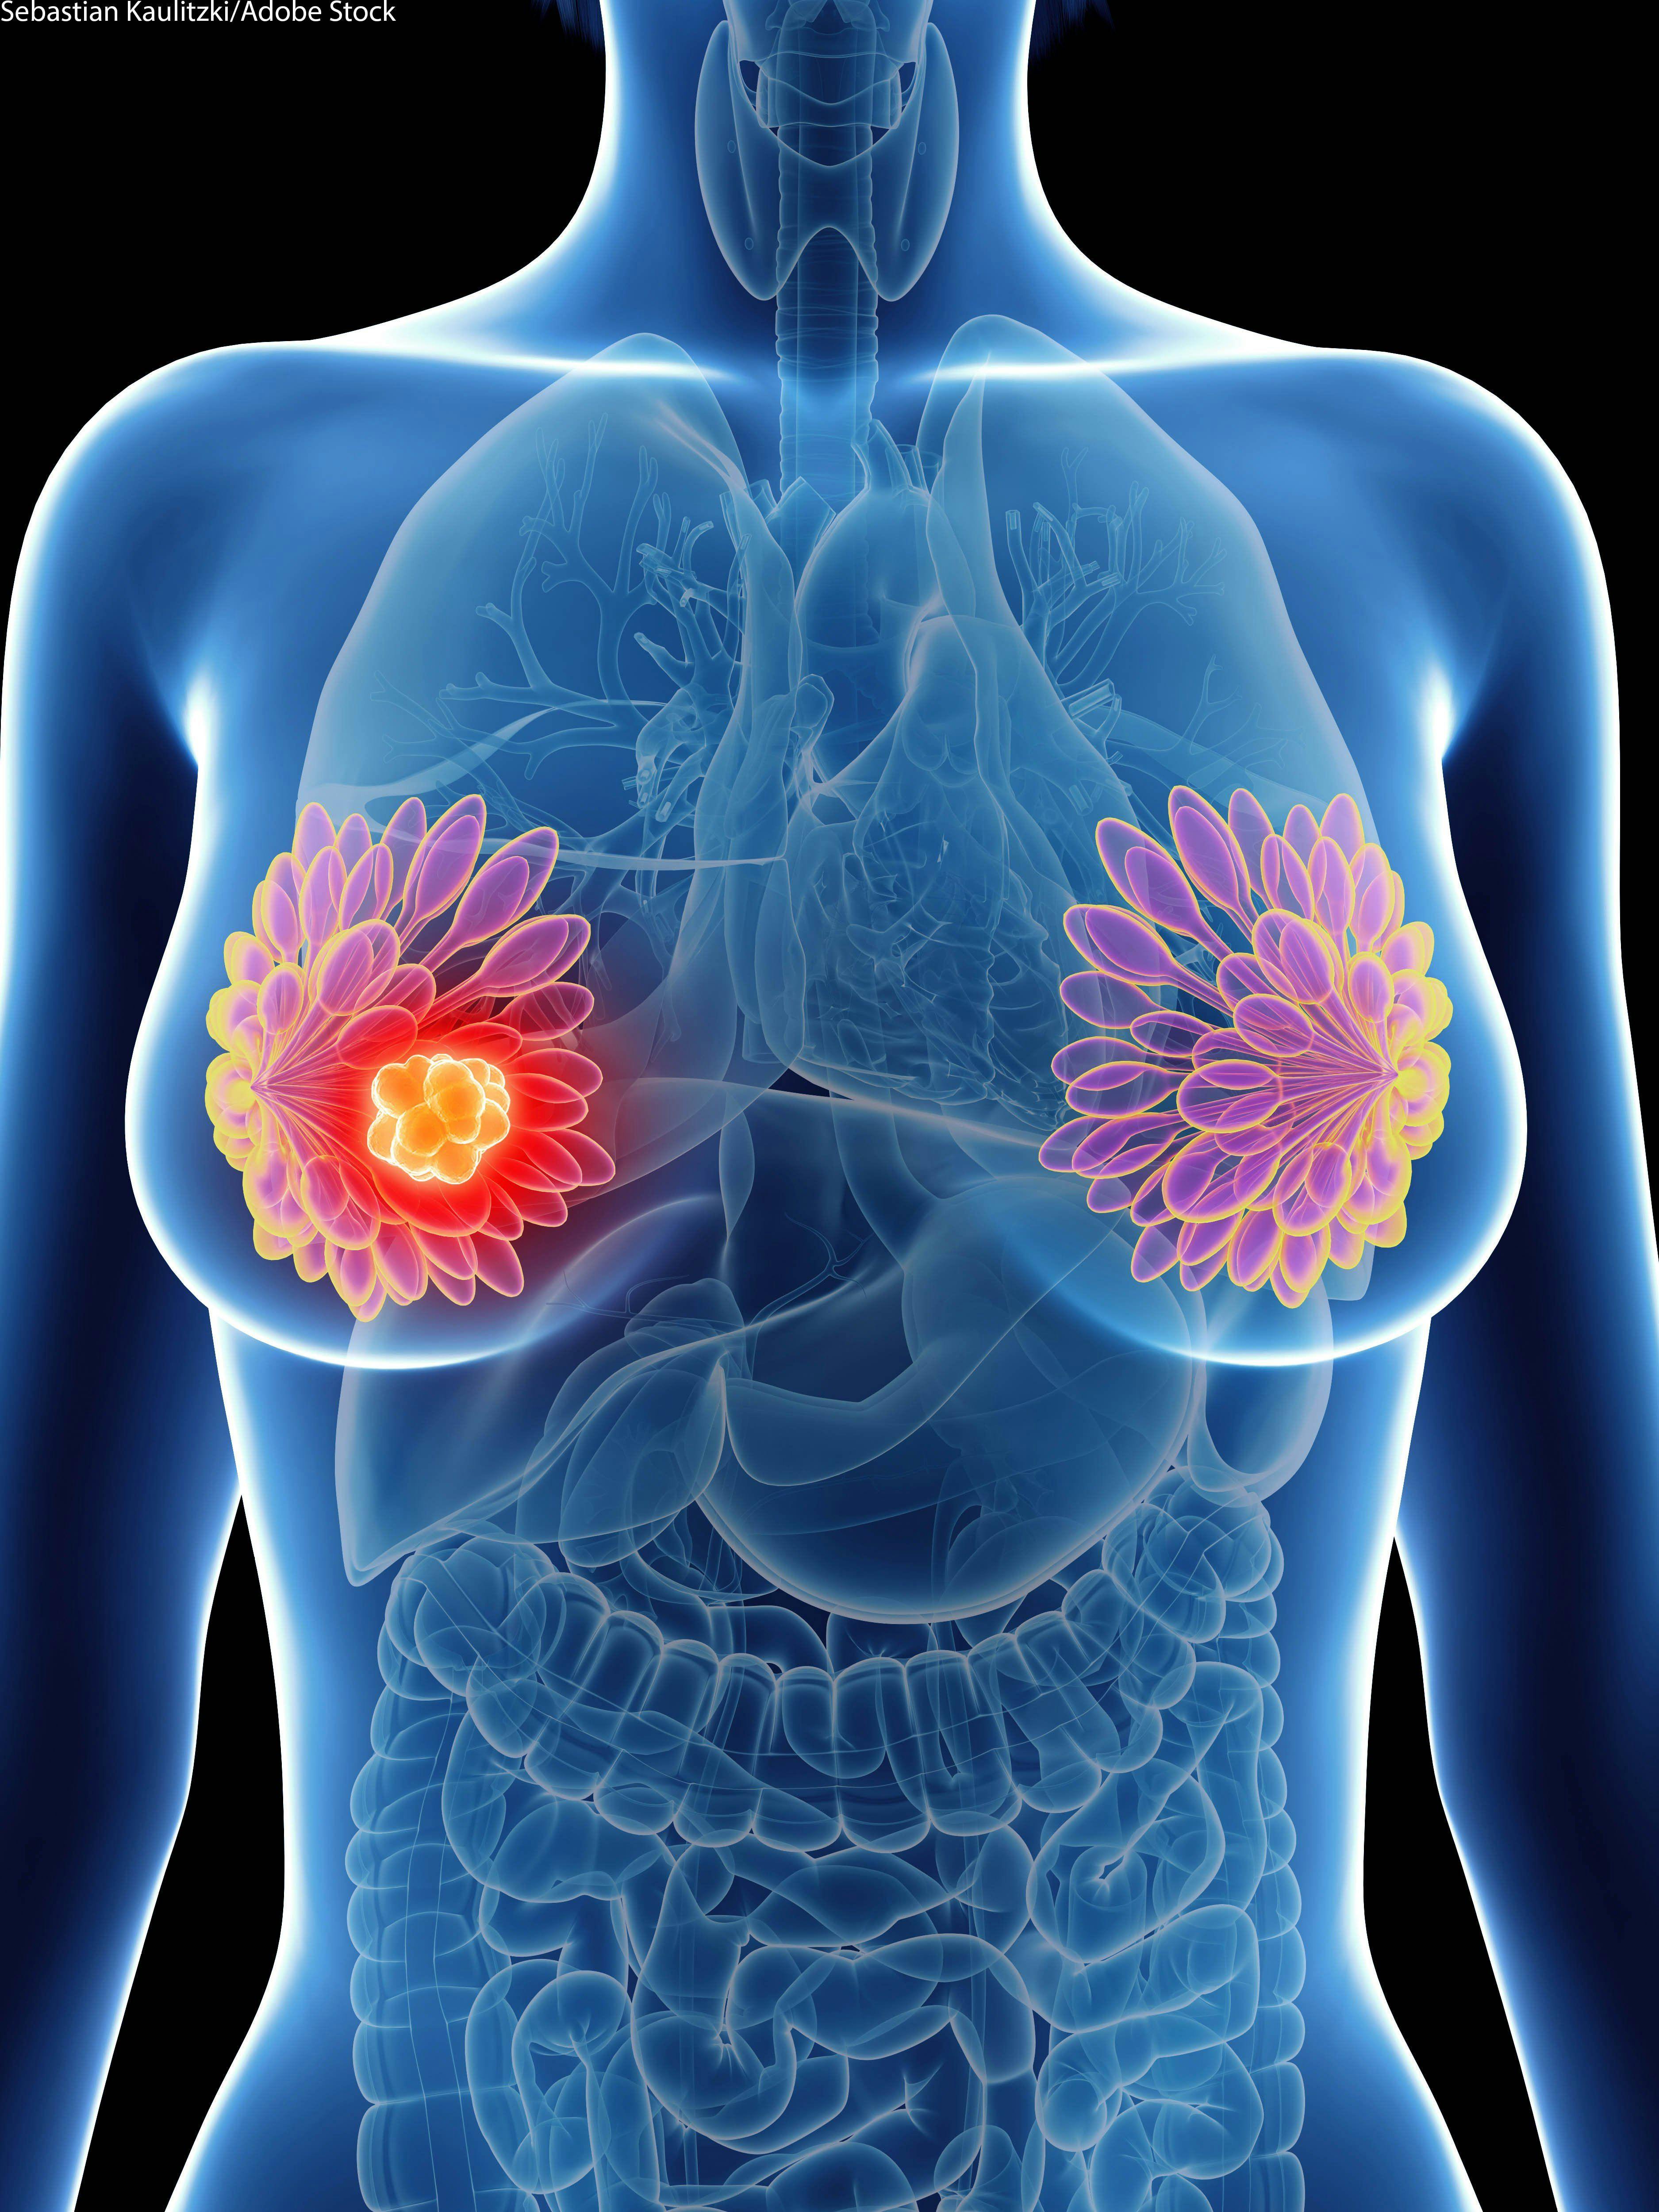 Analysis Reveals Ideal Time Period to Begin Adjuvant Chemotherapy for HER2-Positive Breast Cancer